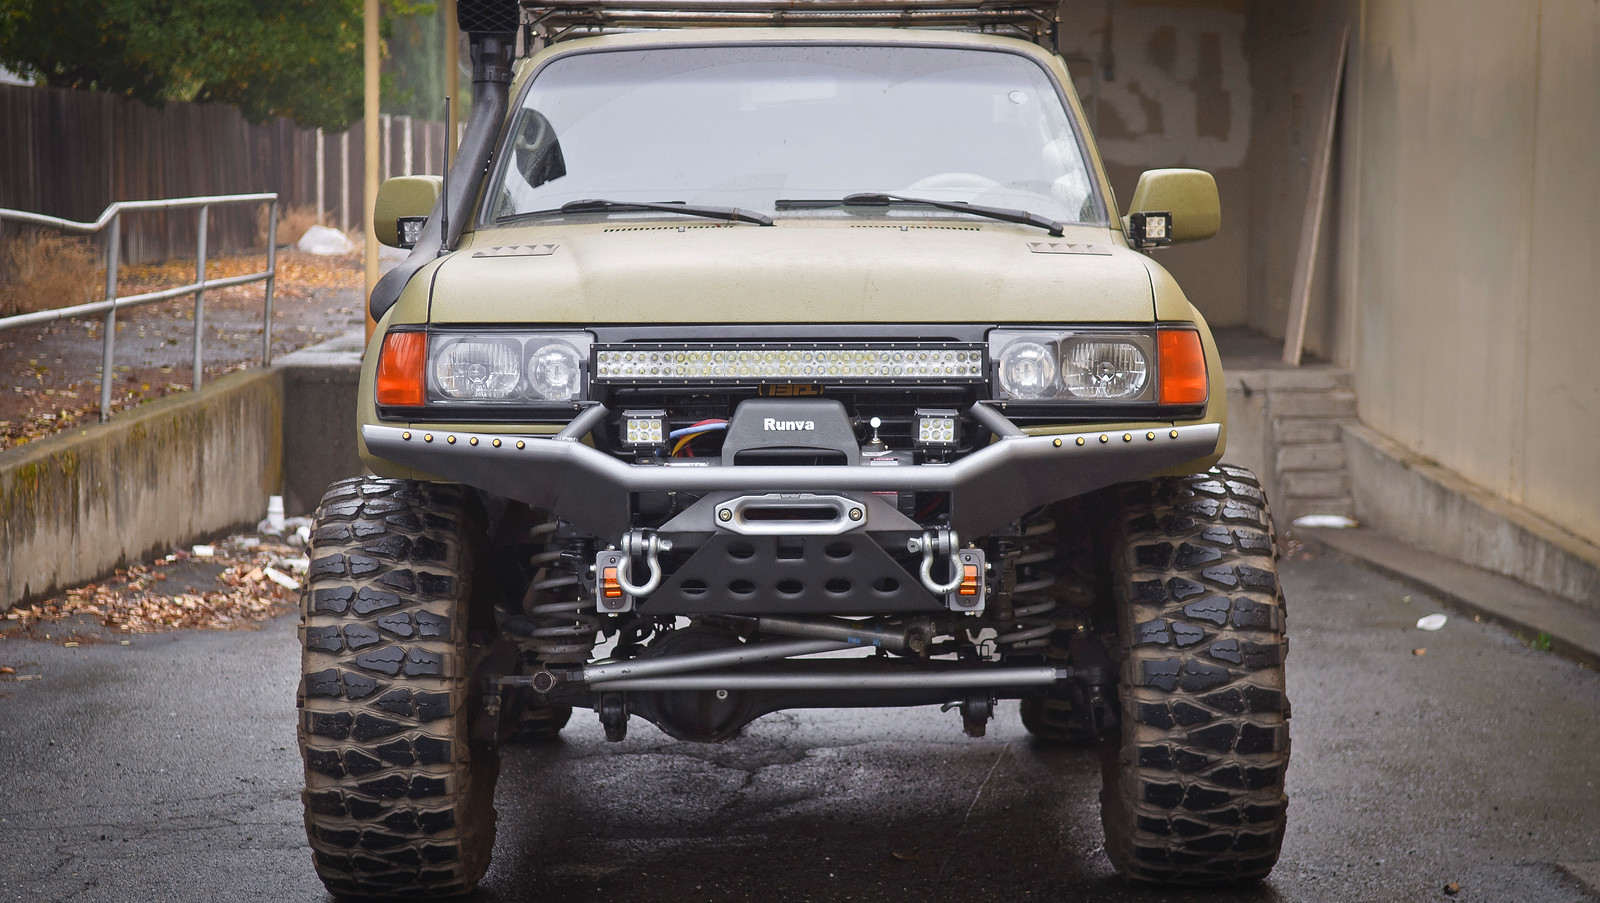 Front DIY. https://forum.ih8mud.com/threads/front-bumper-facelift-aoe-to-4x...